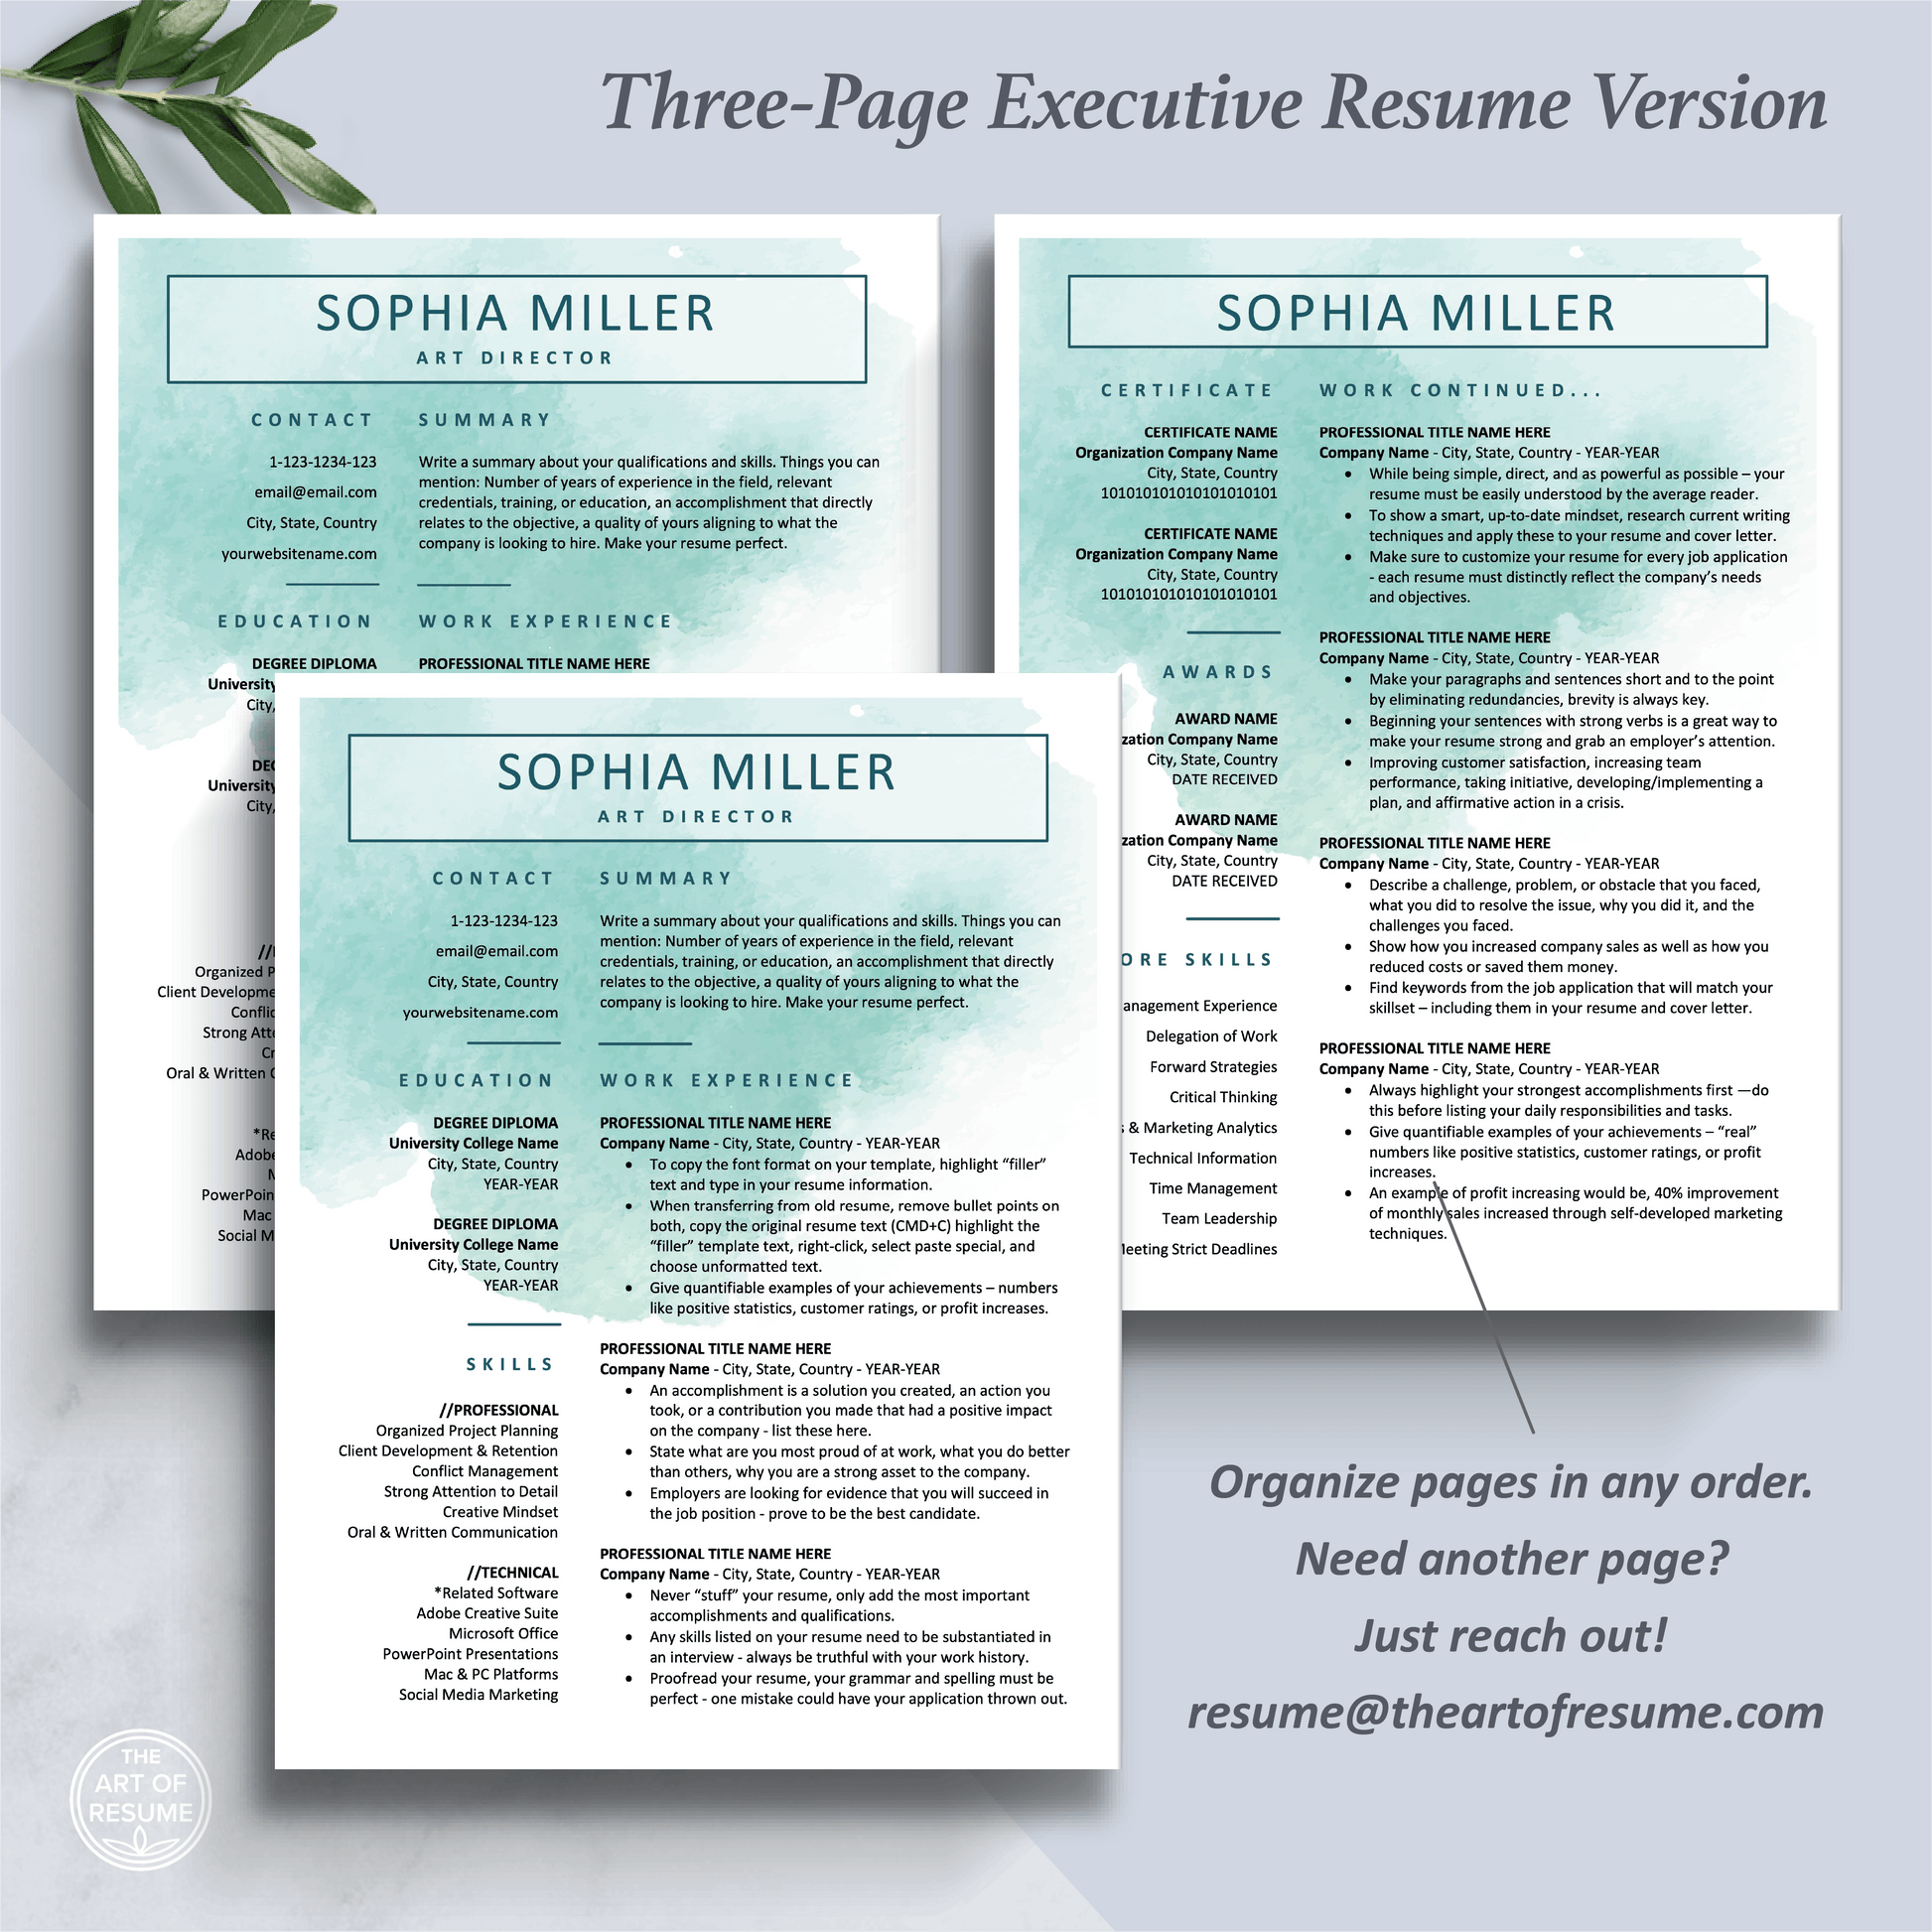 The Art of Resume Templates | Three-Page Creative Teal Blue Watercolor Executive CEO C-Suite Level  Resume CV Template Format | Curriculum Vitae